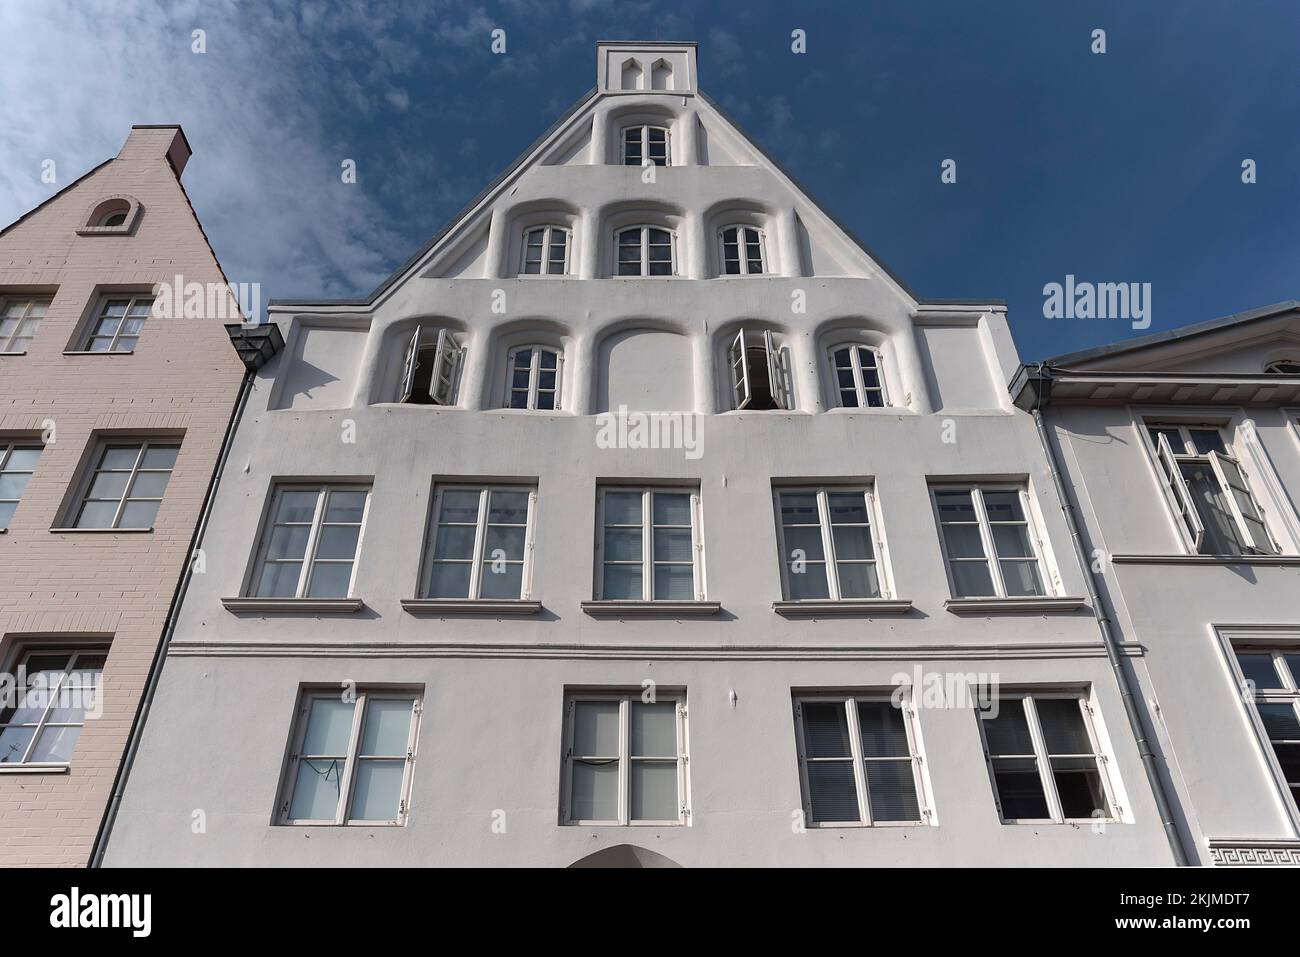 Historic gabled house, 17th century, residential and commercial building, completely painted in white, Lüneburg, Niersachsen, Germany, Europe Stock Photo